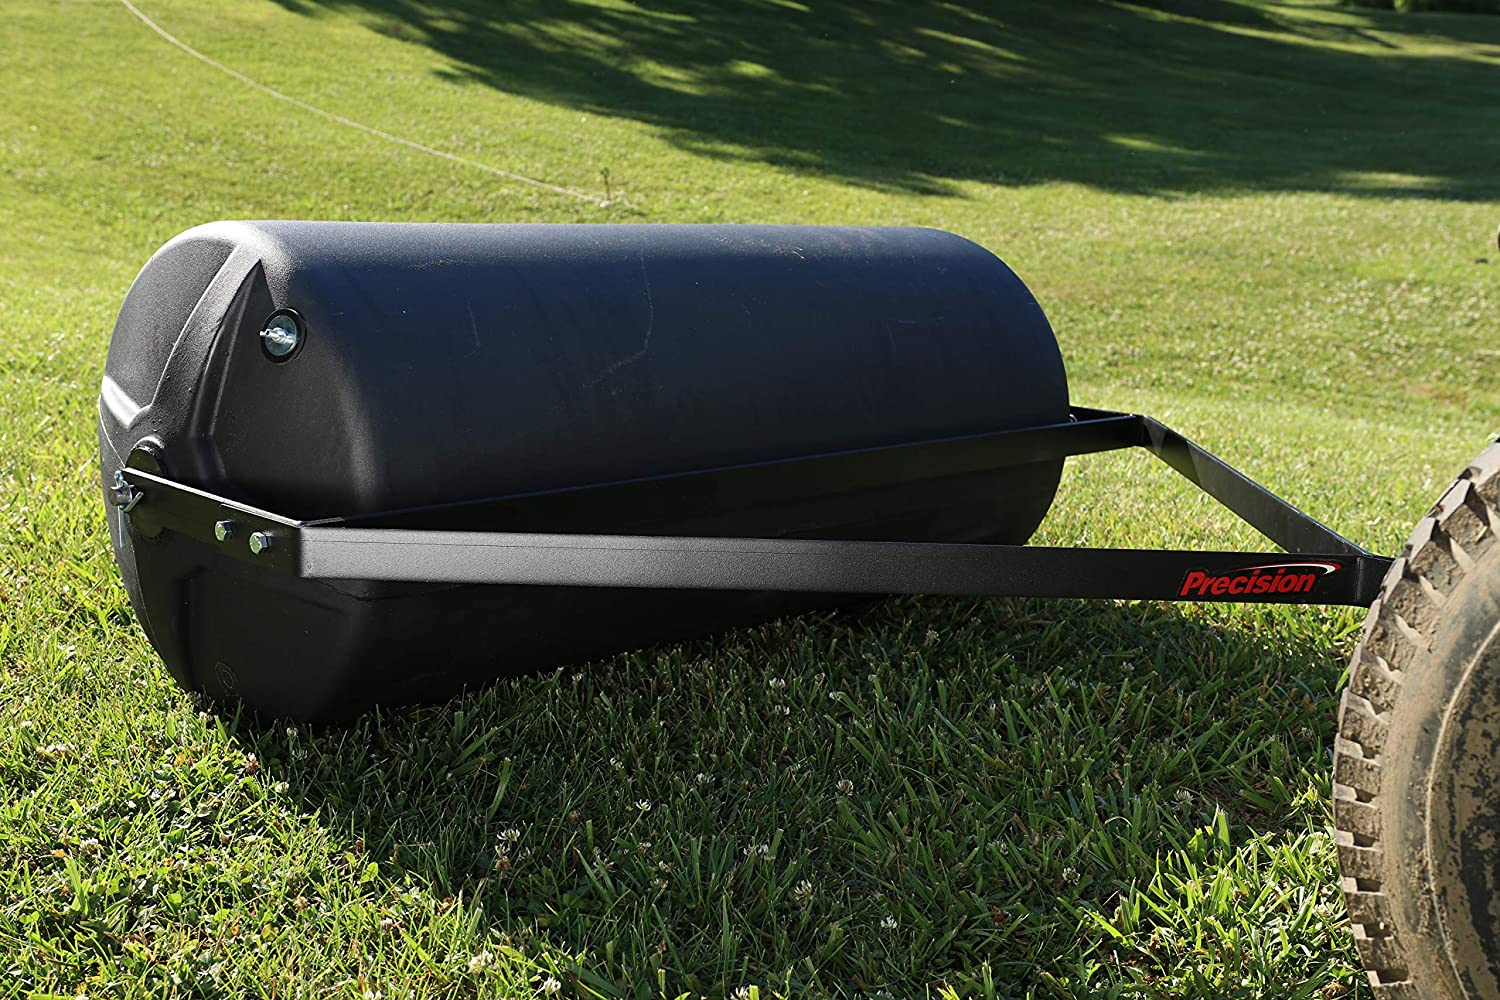 Precision Products PLR1836 Tow Behind Lawn Roller, 18-Inch by 36-Inch, Dark Grey - $150